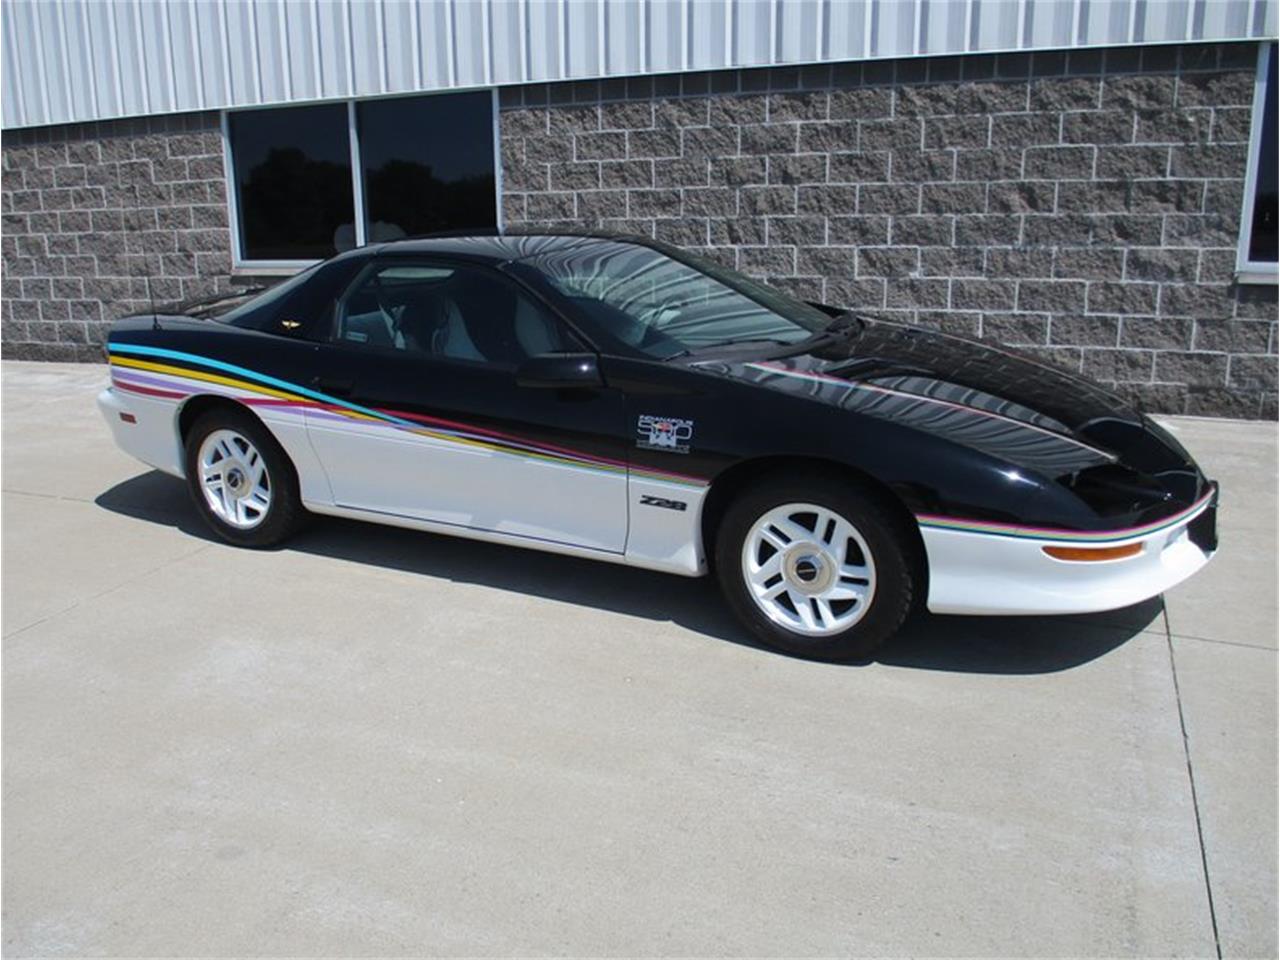 For Sale: 1993 Chevrolet Camaro in Greenwood, Indiana for sale in Greenwood, IN